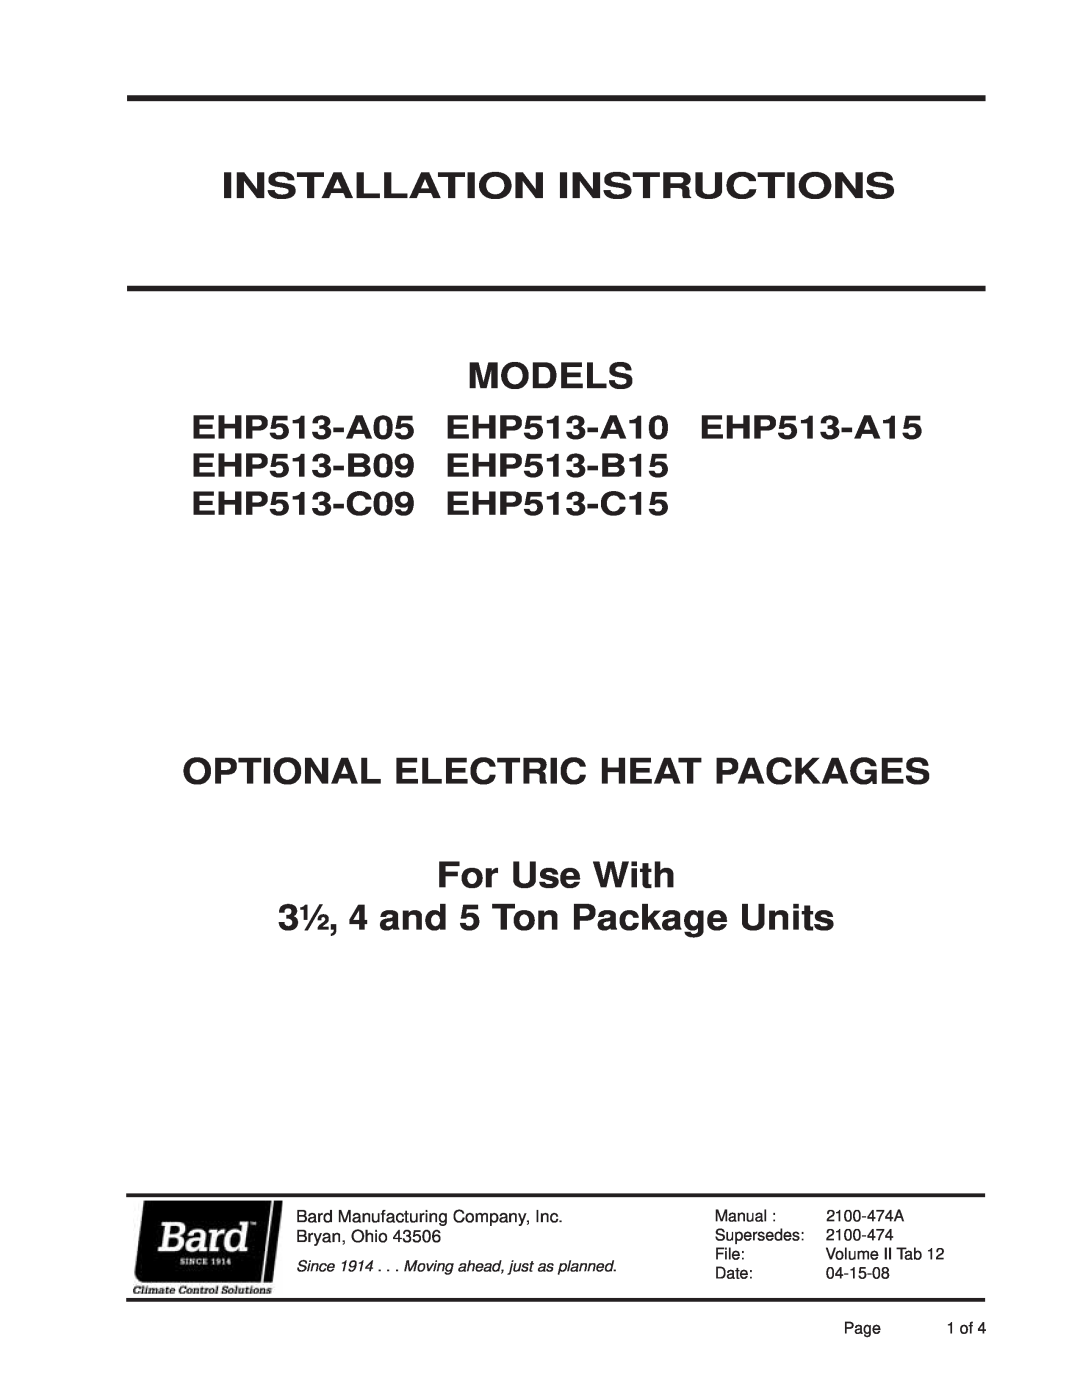 Bard EHP513-B09 installation instructions Installation Instructions Models, OPTIONAL ELECTRIC HEAT PACKAGES For Use With 